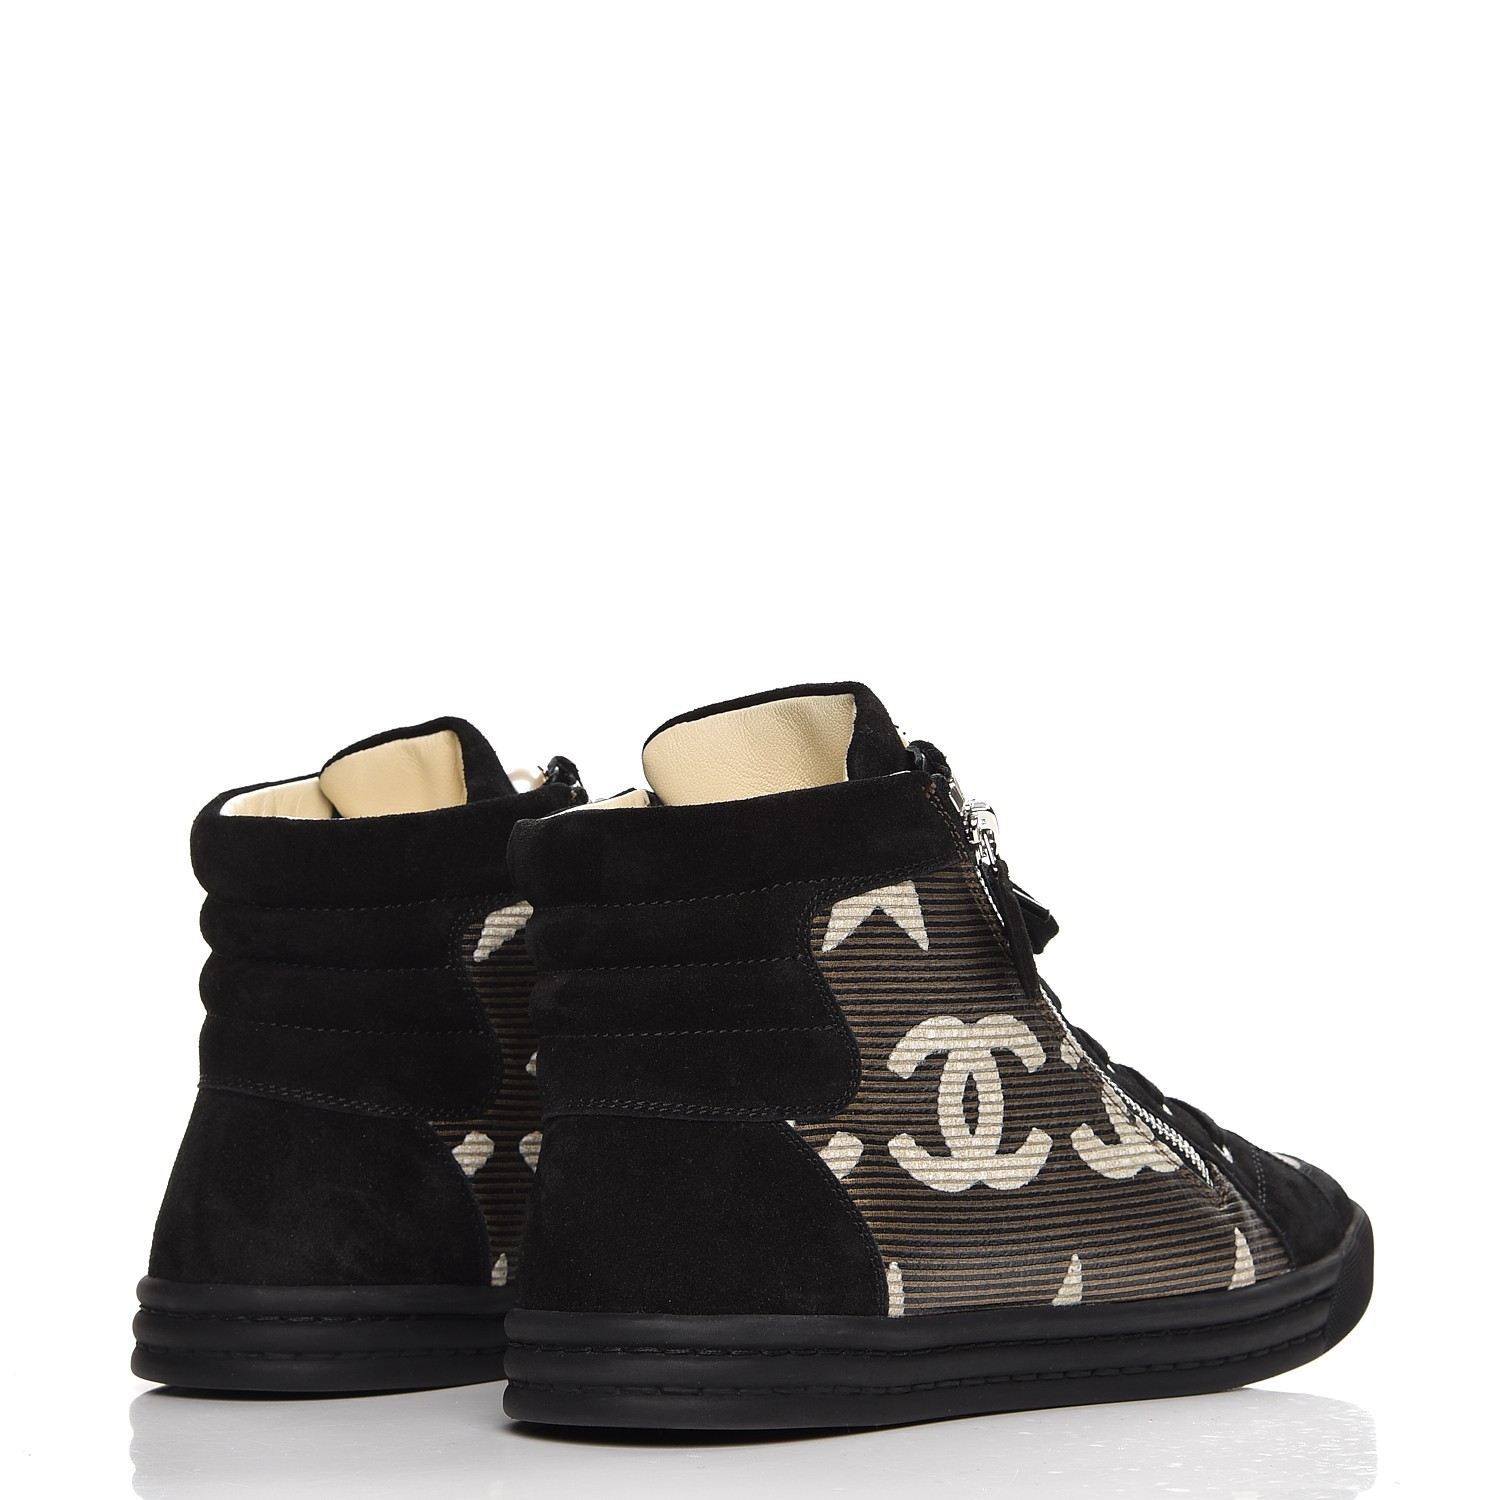 CHANEL Canvas Suede CC Star Zipped High Top CC Sneakers 38 Black 227392